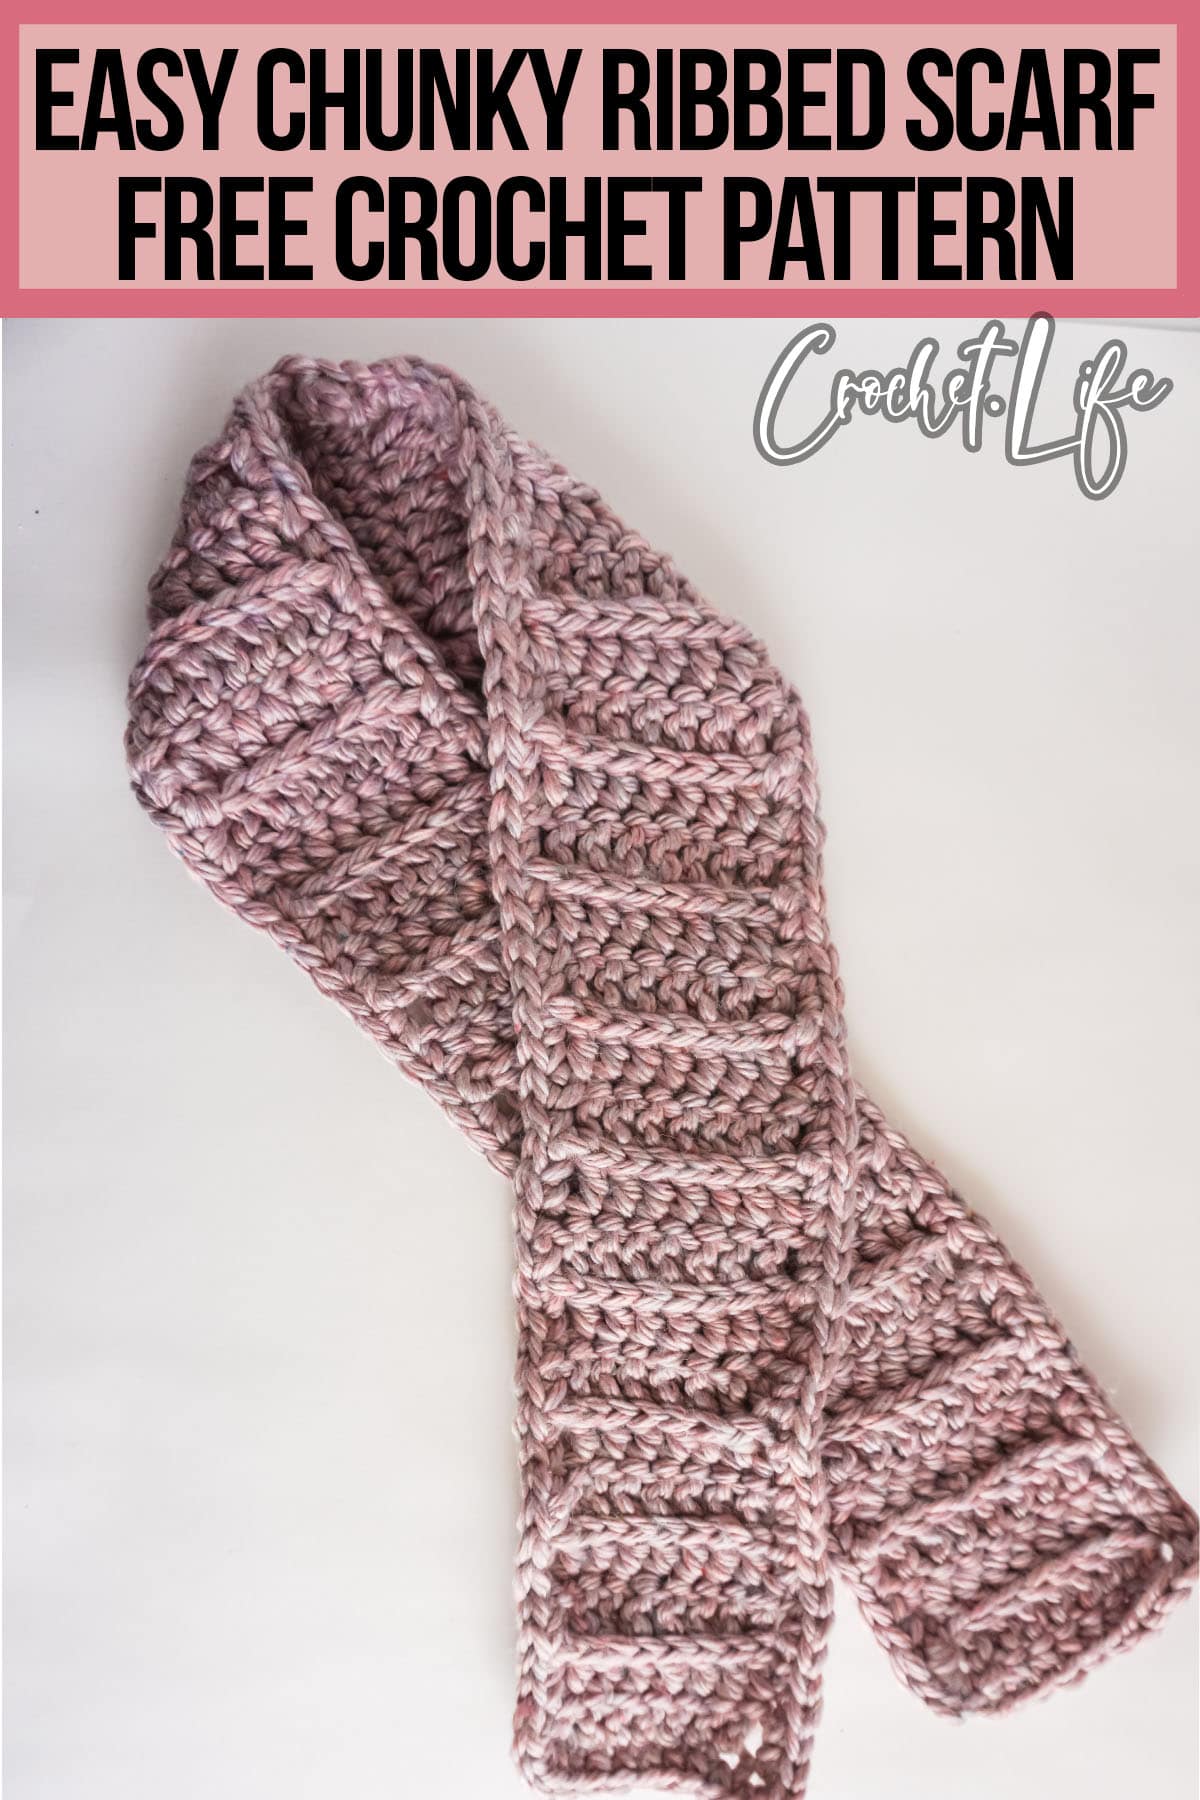 free scarf crochet pattern with text which reads easy chunky ribbed scarf free crochet pattern 